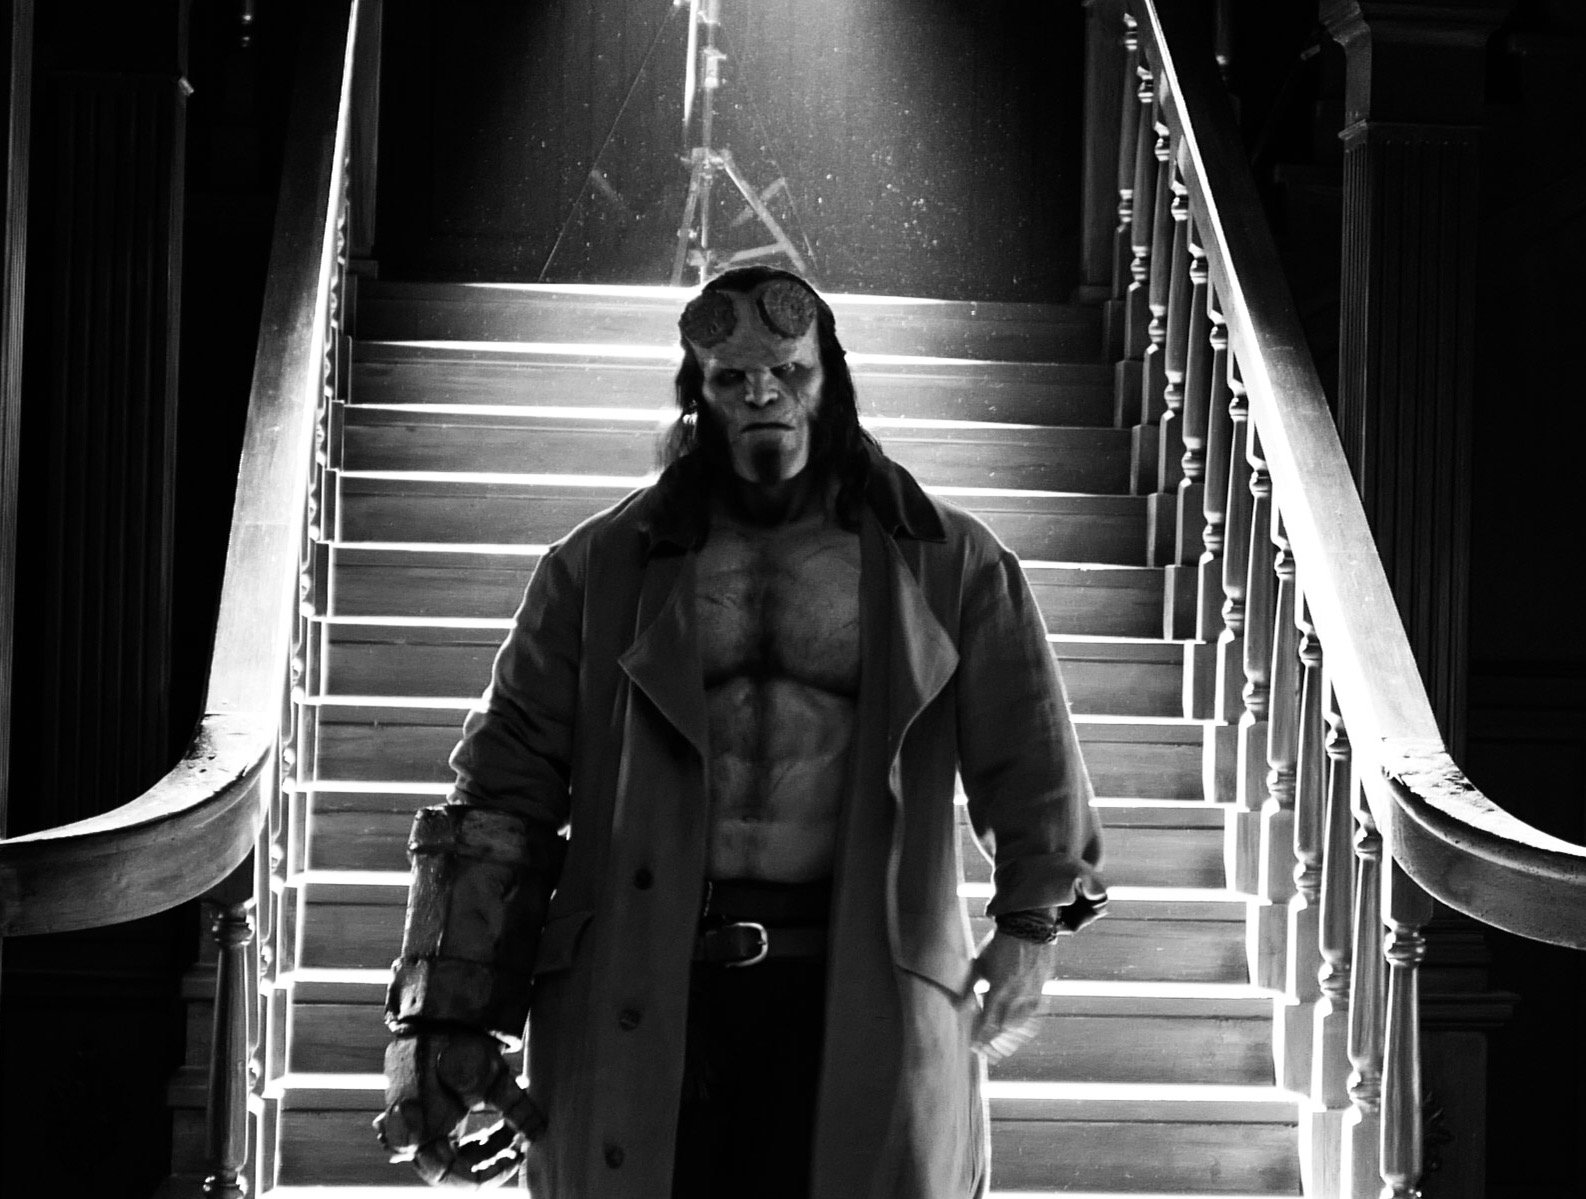 New Hellboy Posters Released Trailer Coming Thursday